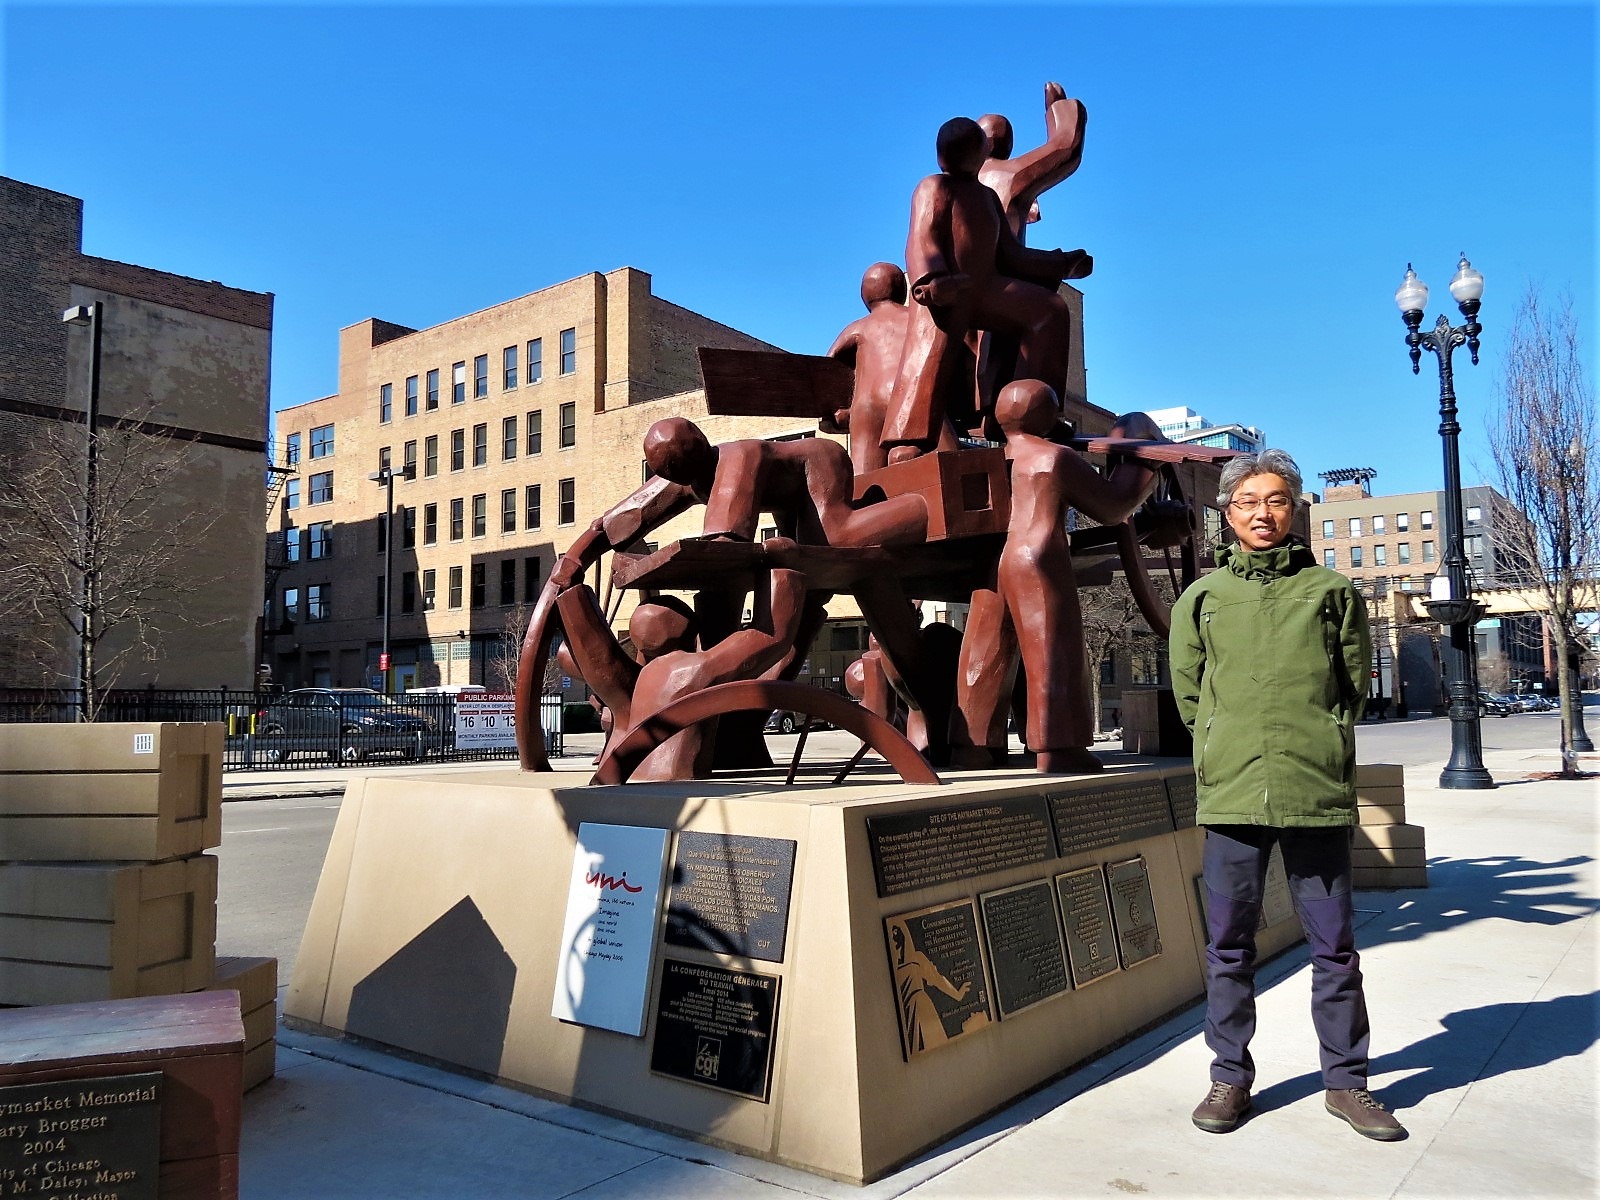 A CBA rider standing next to a copper color sculpture of human like figures standing on a two wheeled cart.